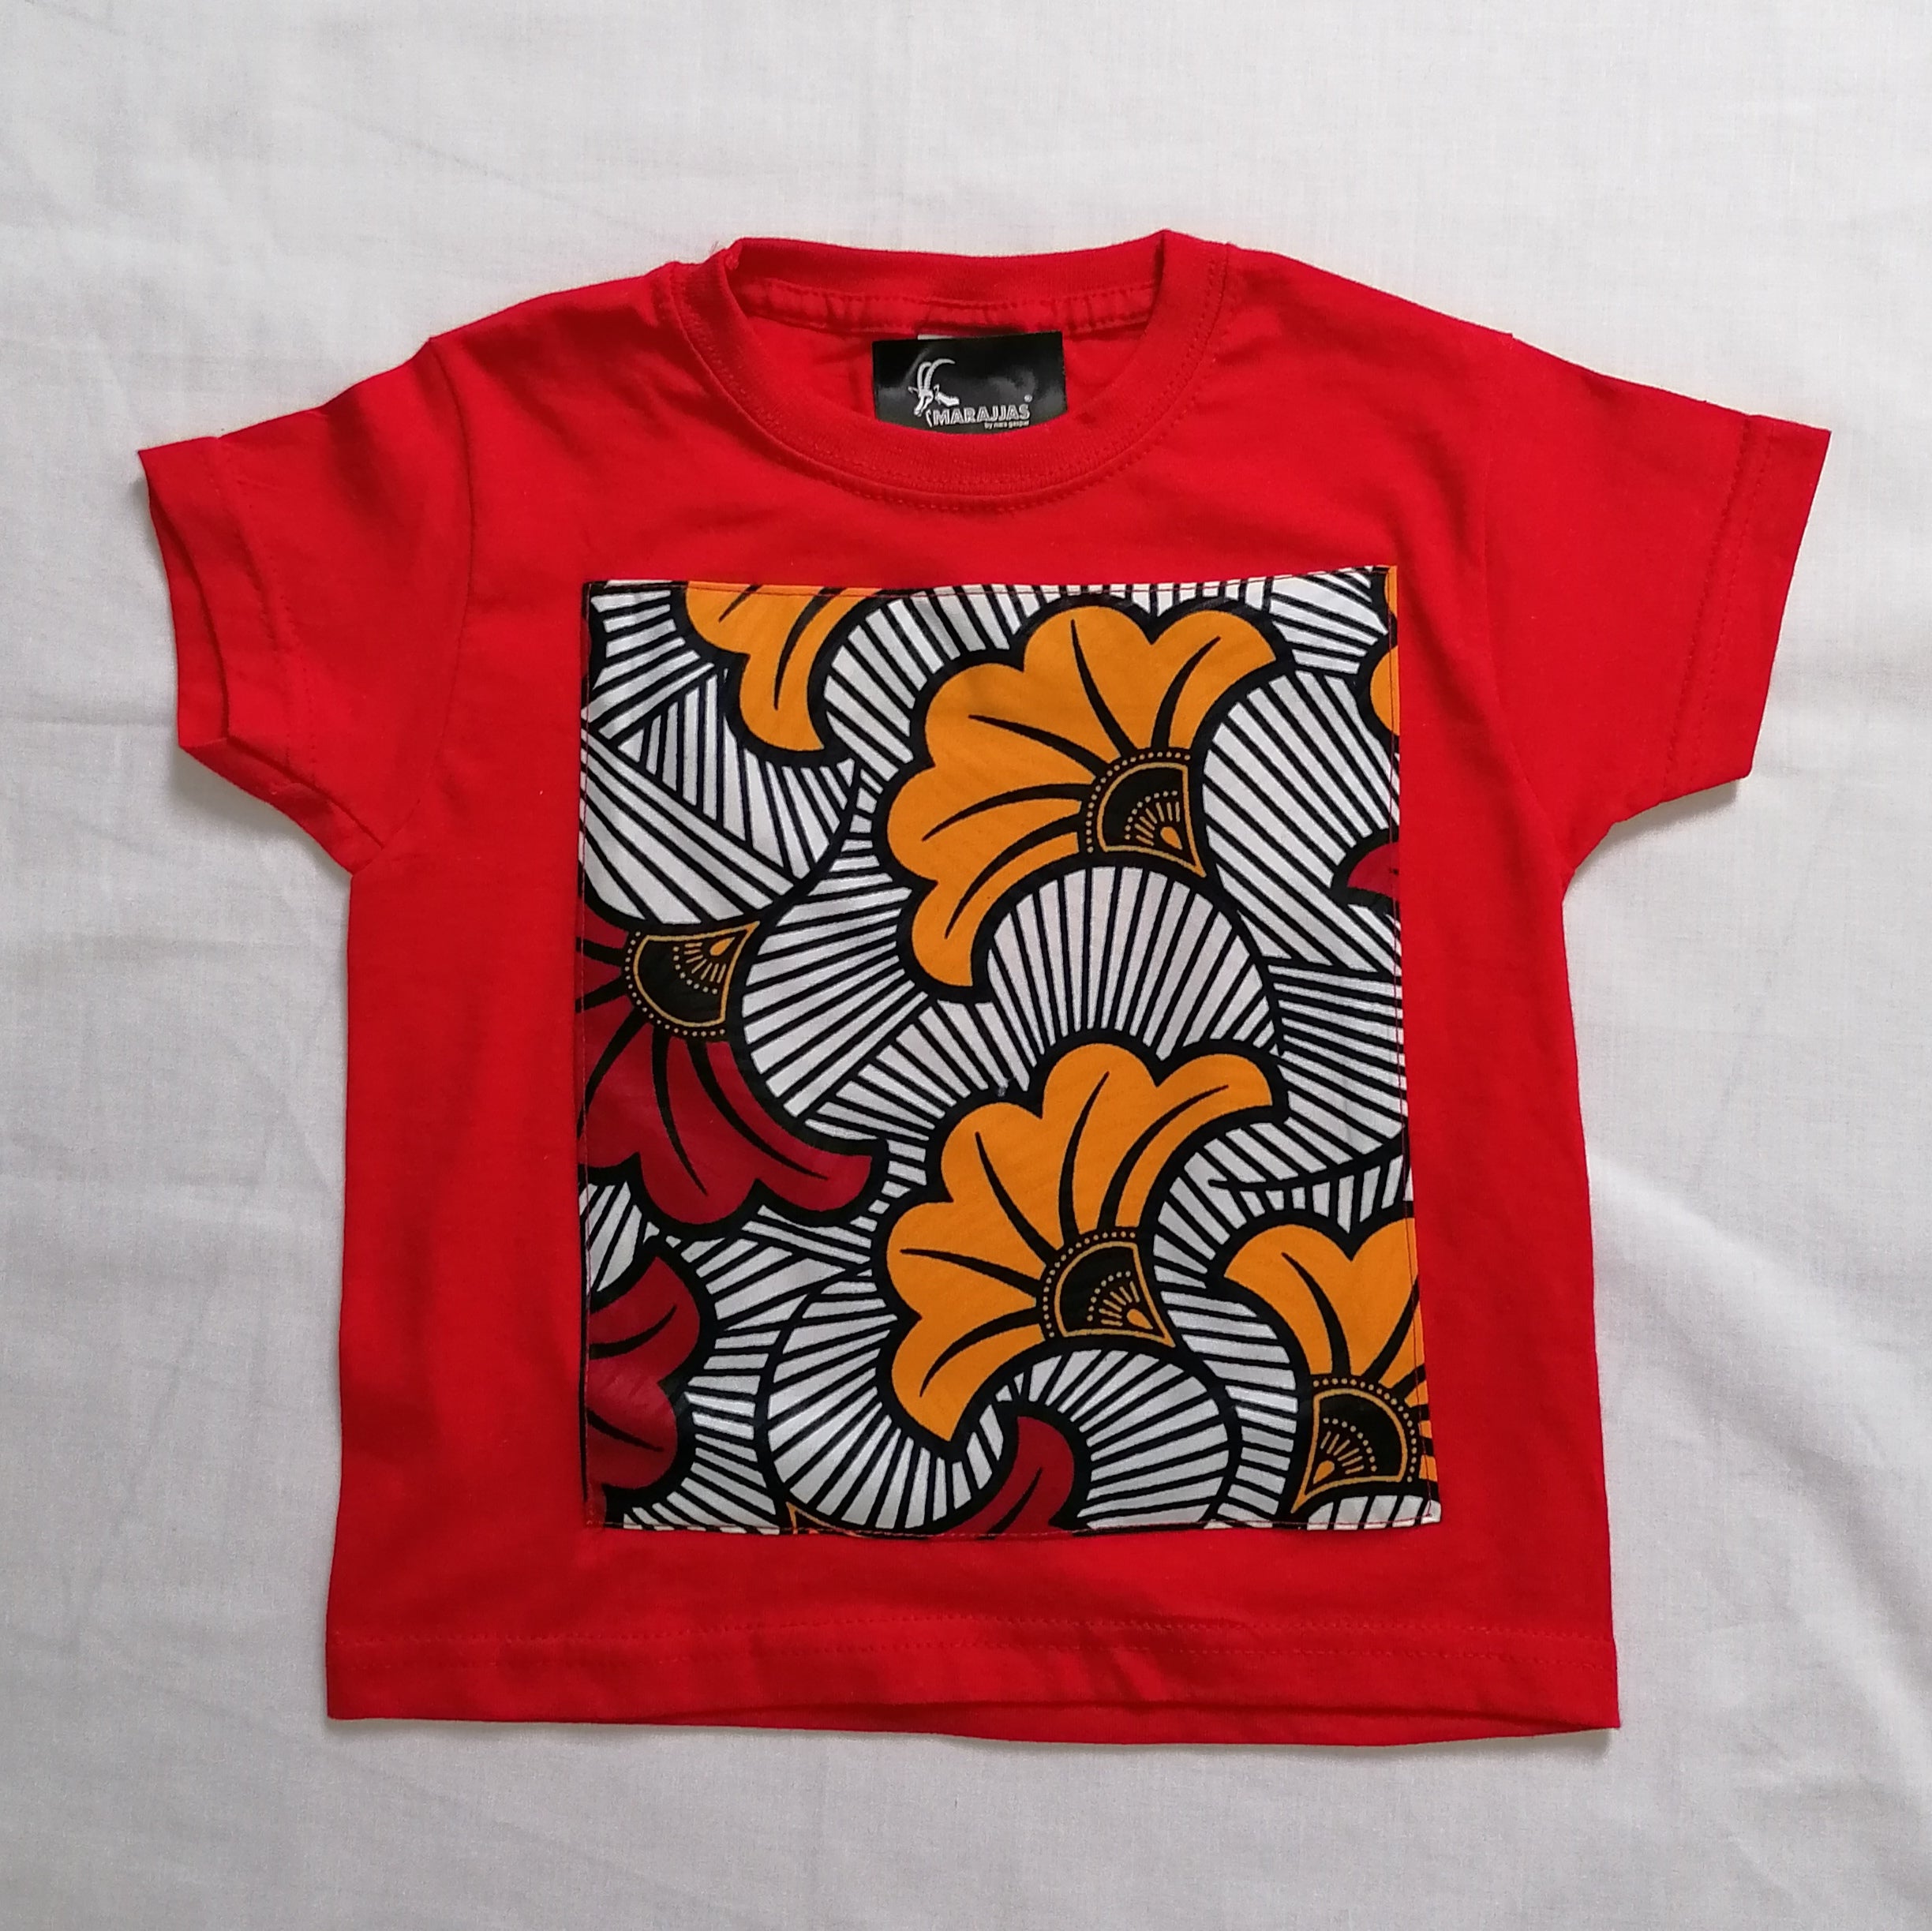 Kids T-shirt in red with Yellow Ankara - British D'sire